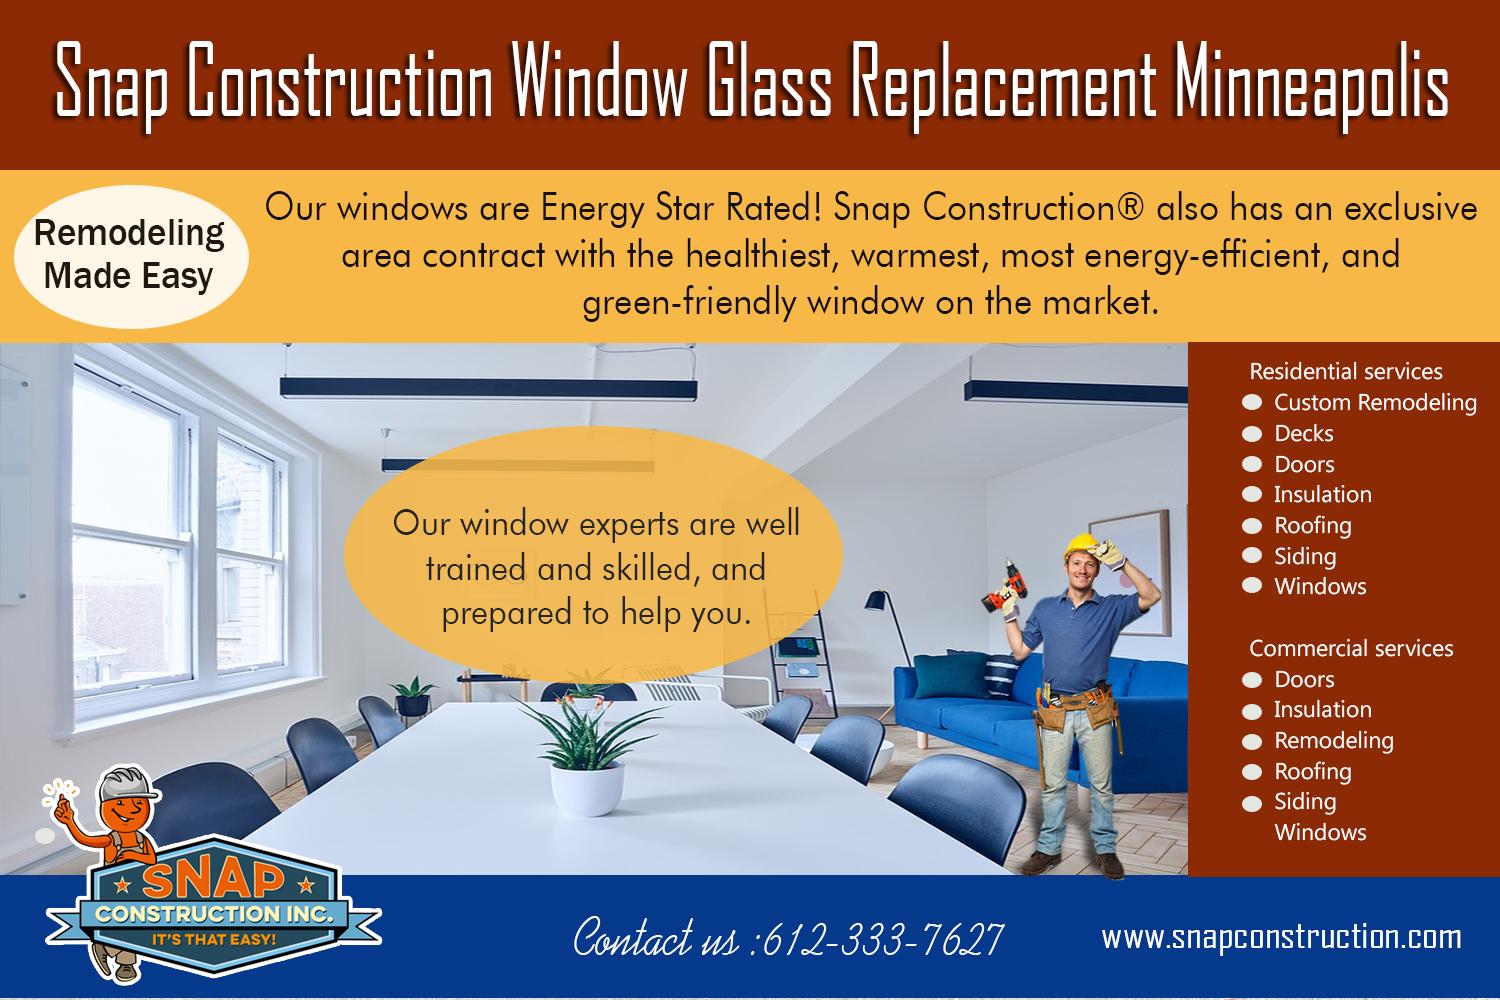 Snap Construction minneapolis window replacement